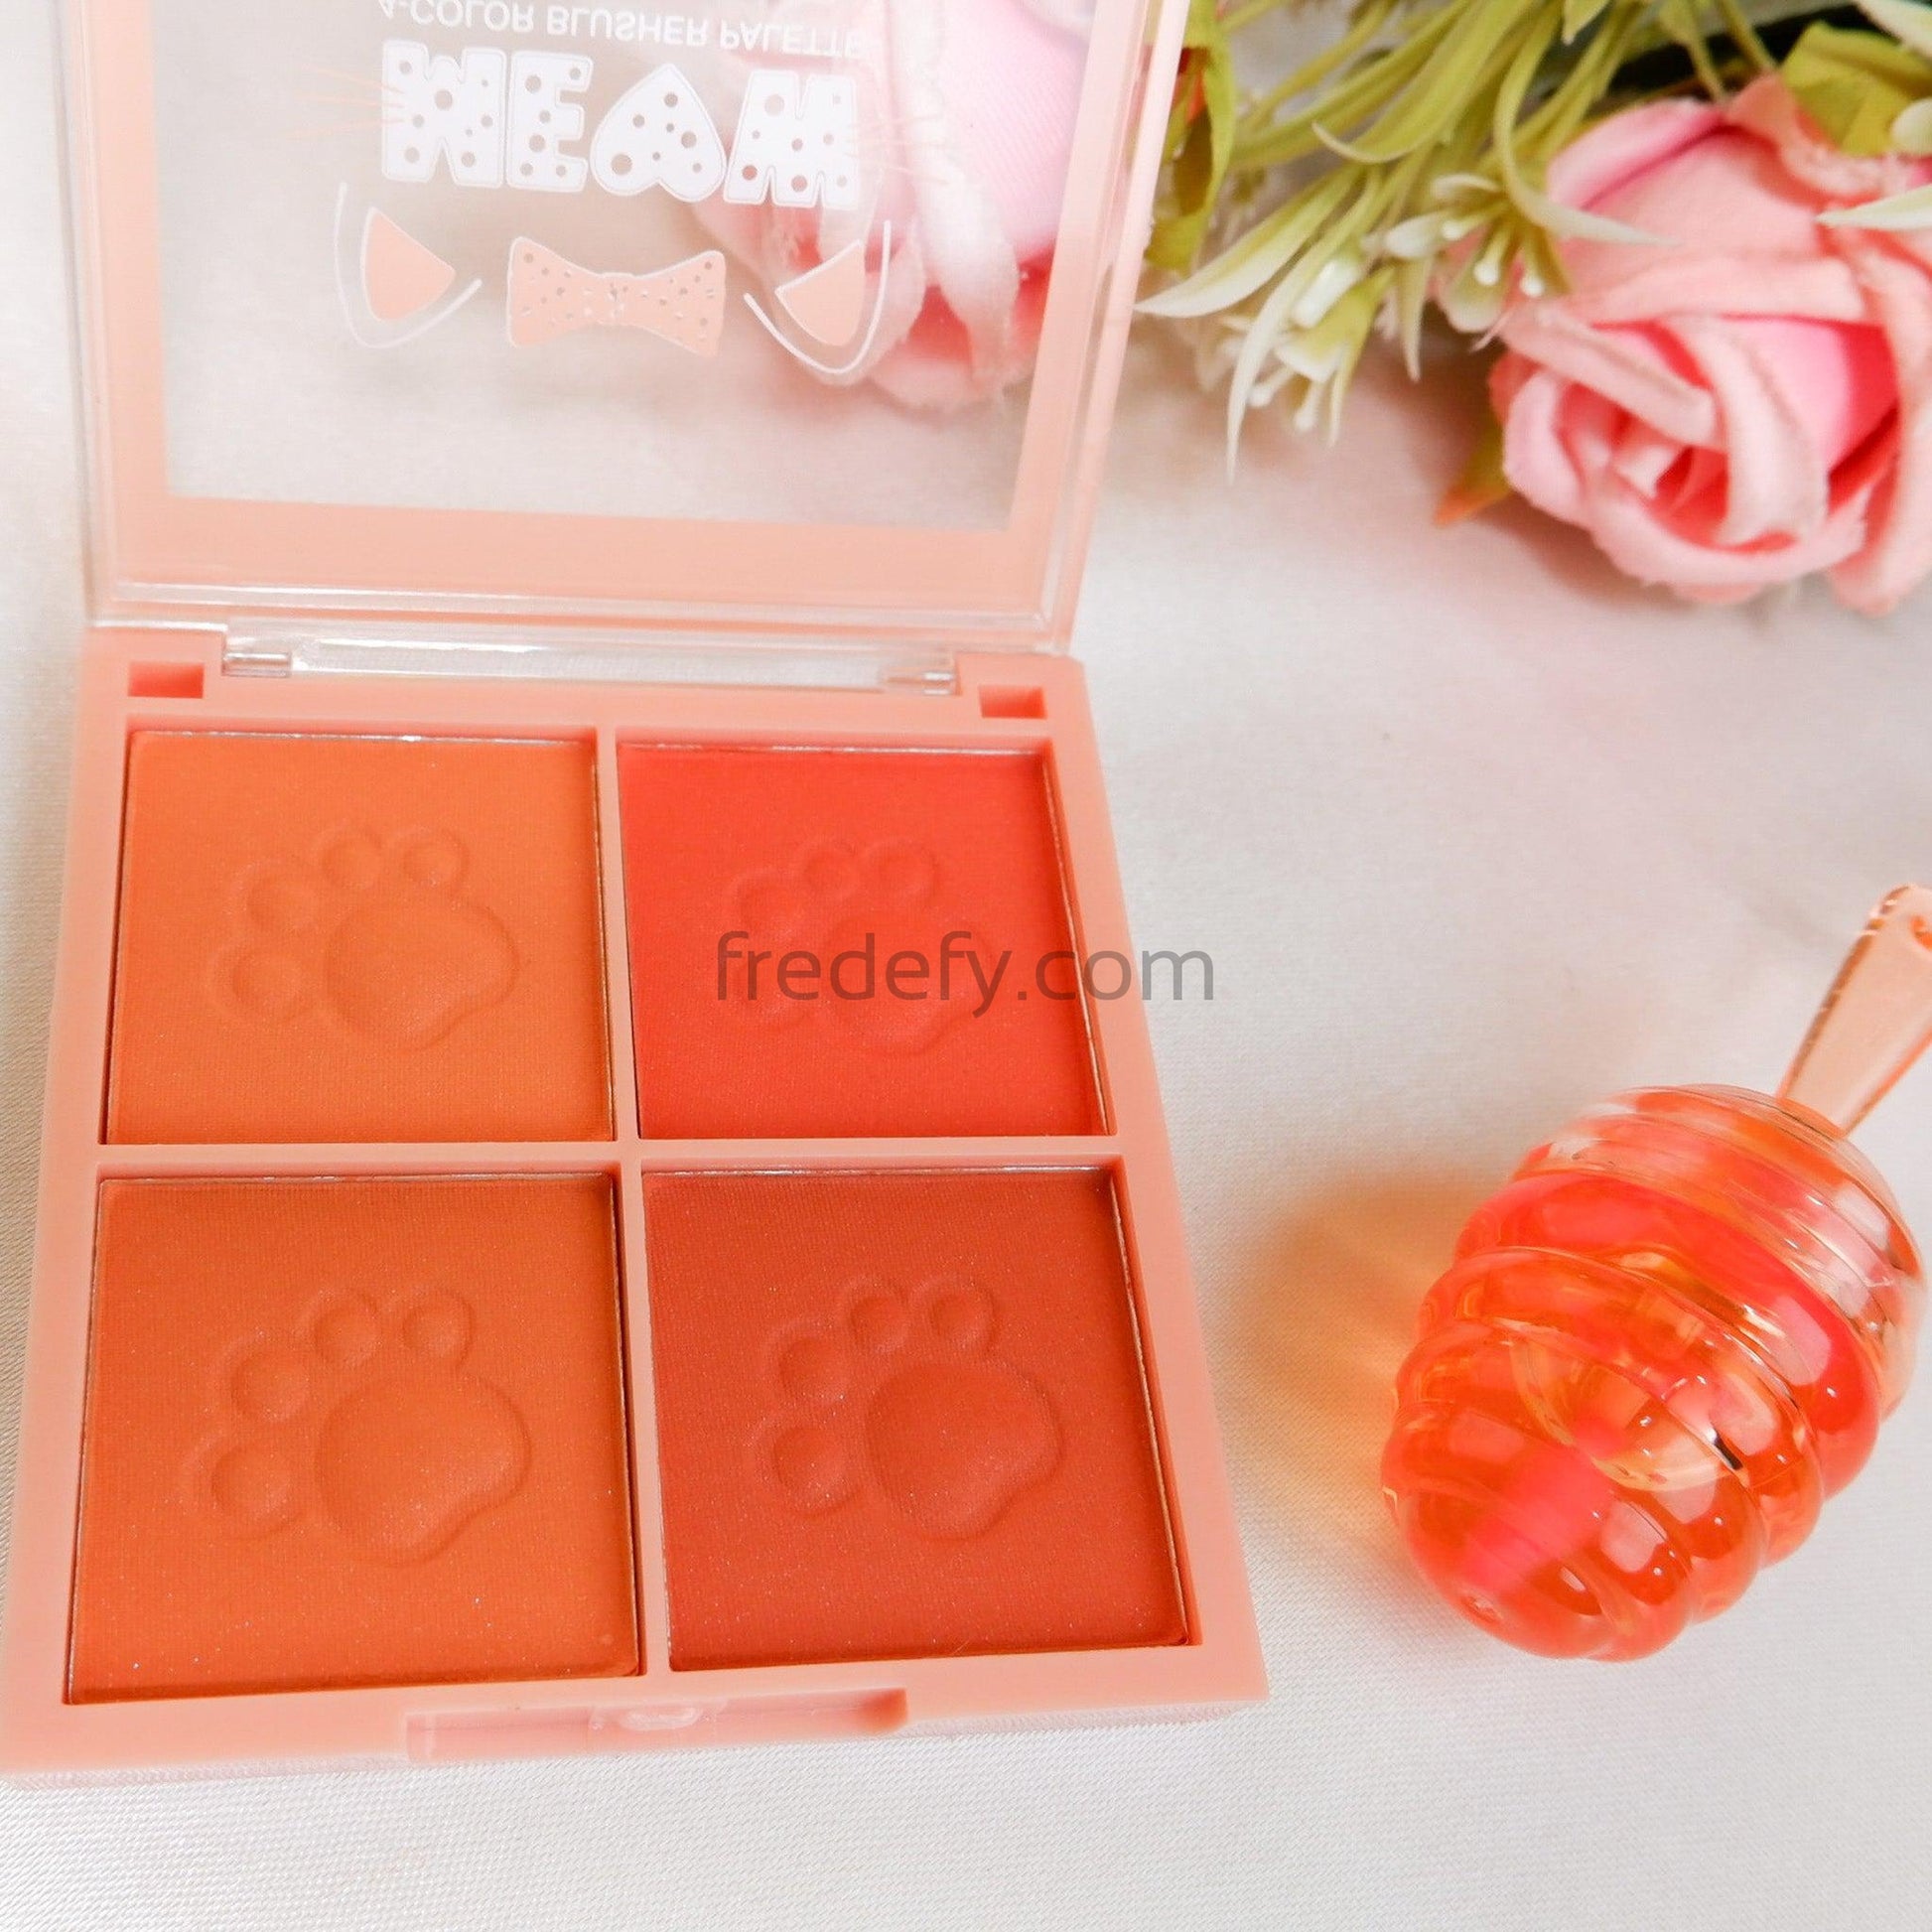 Anylady Meow Palette-Fredefy